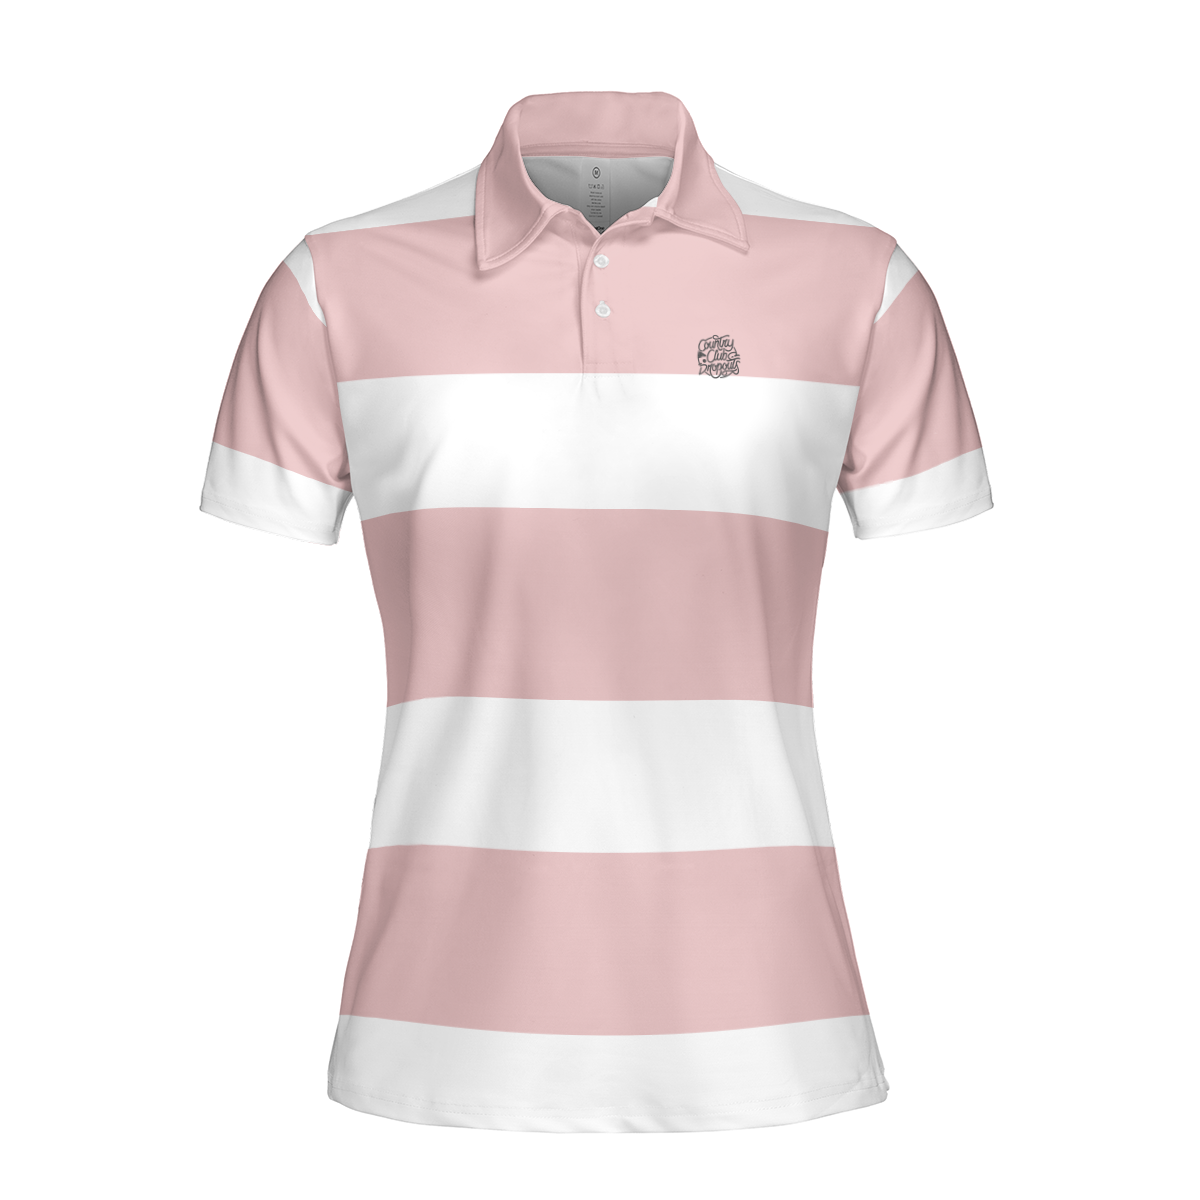 Women's 1994 Tiger Performance Polo – countryclubdropouts